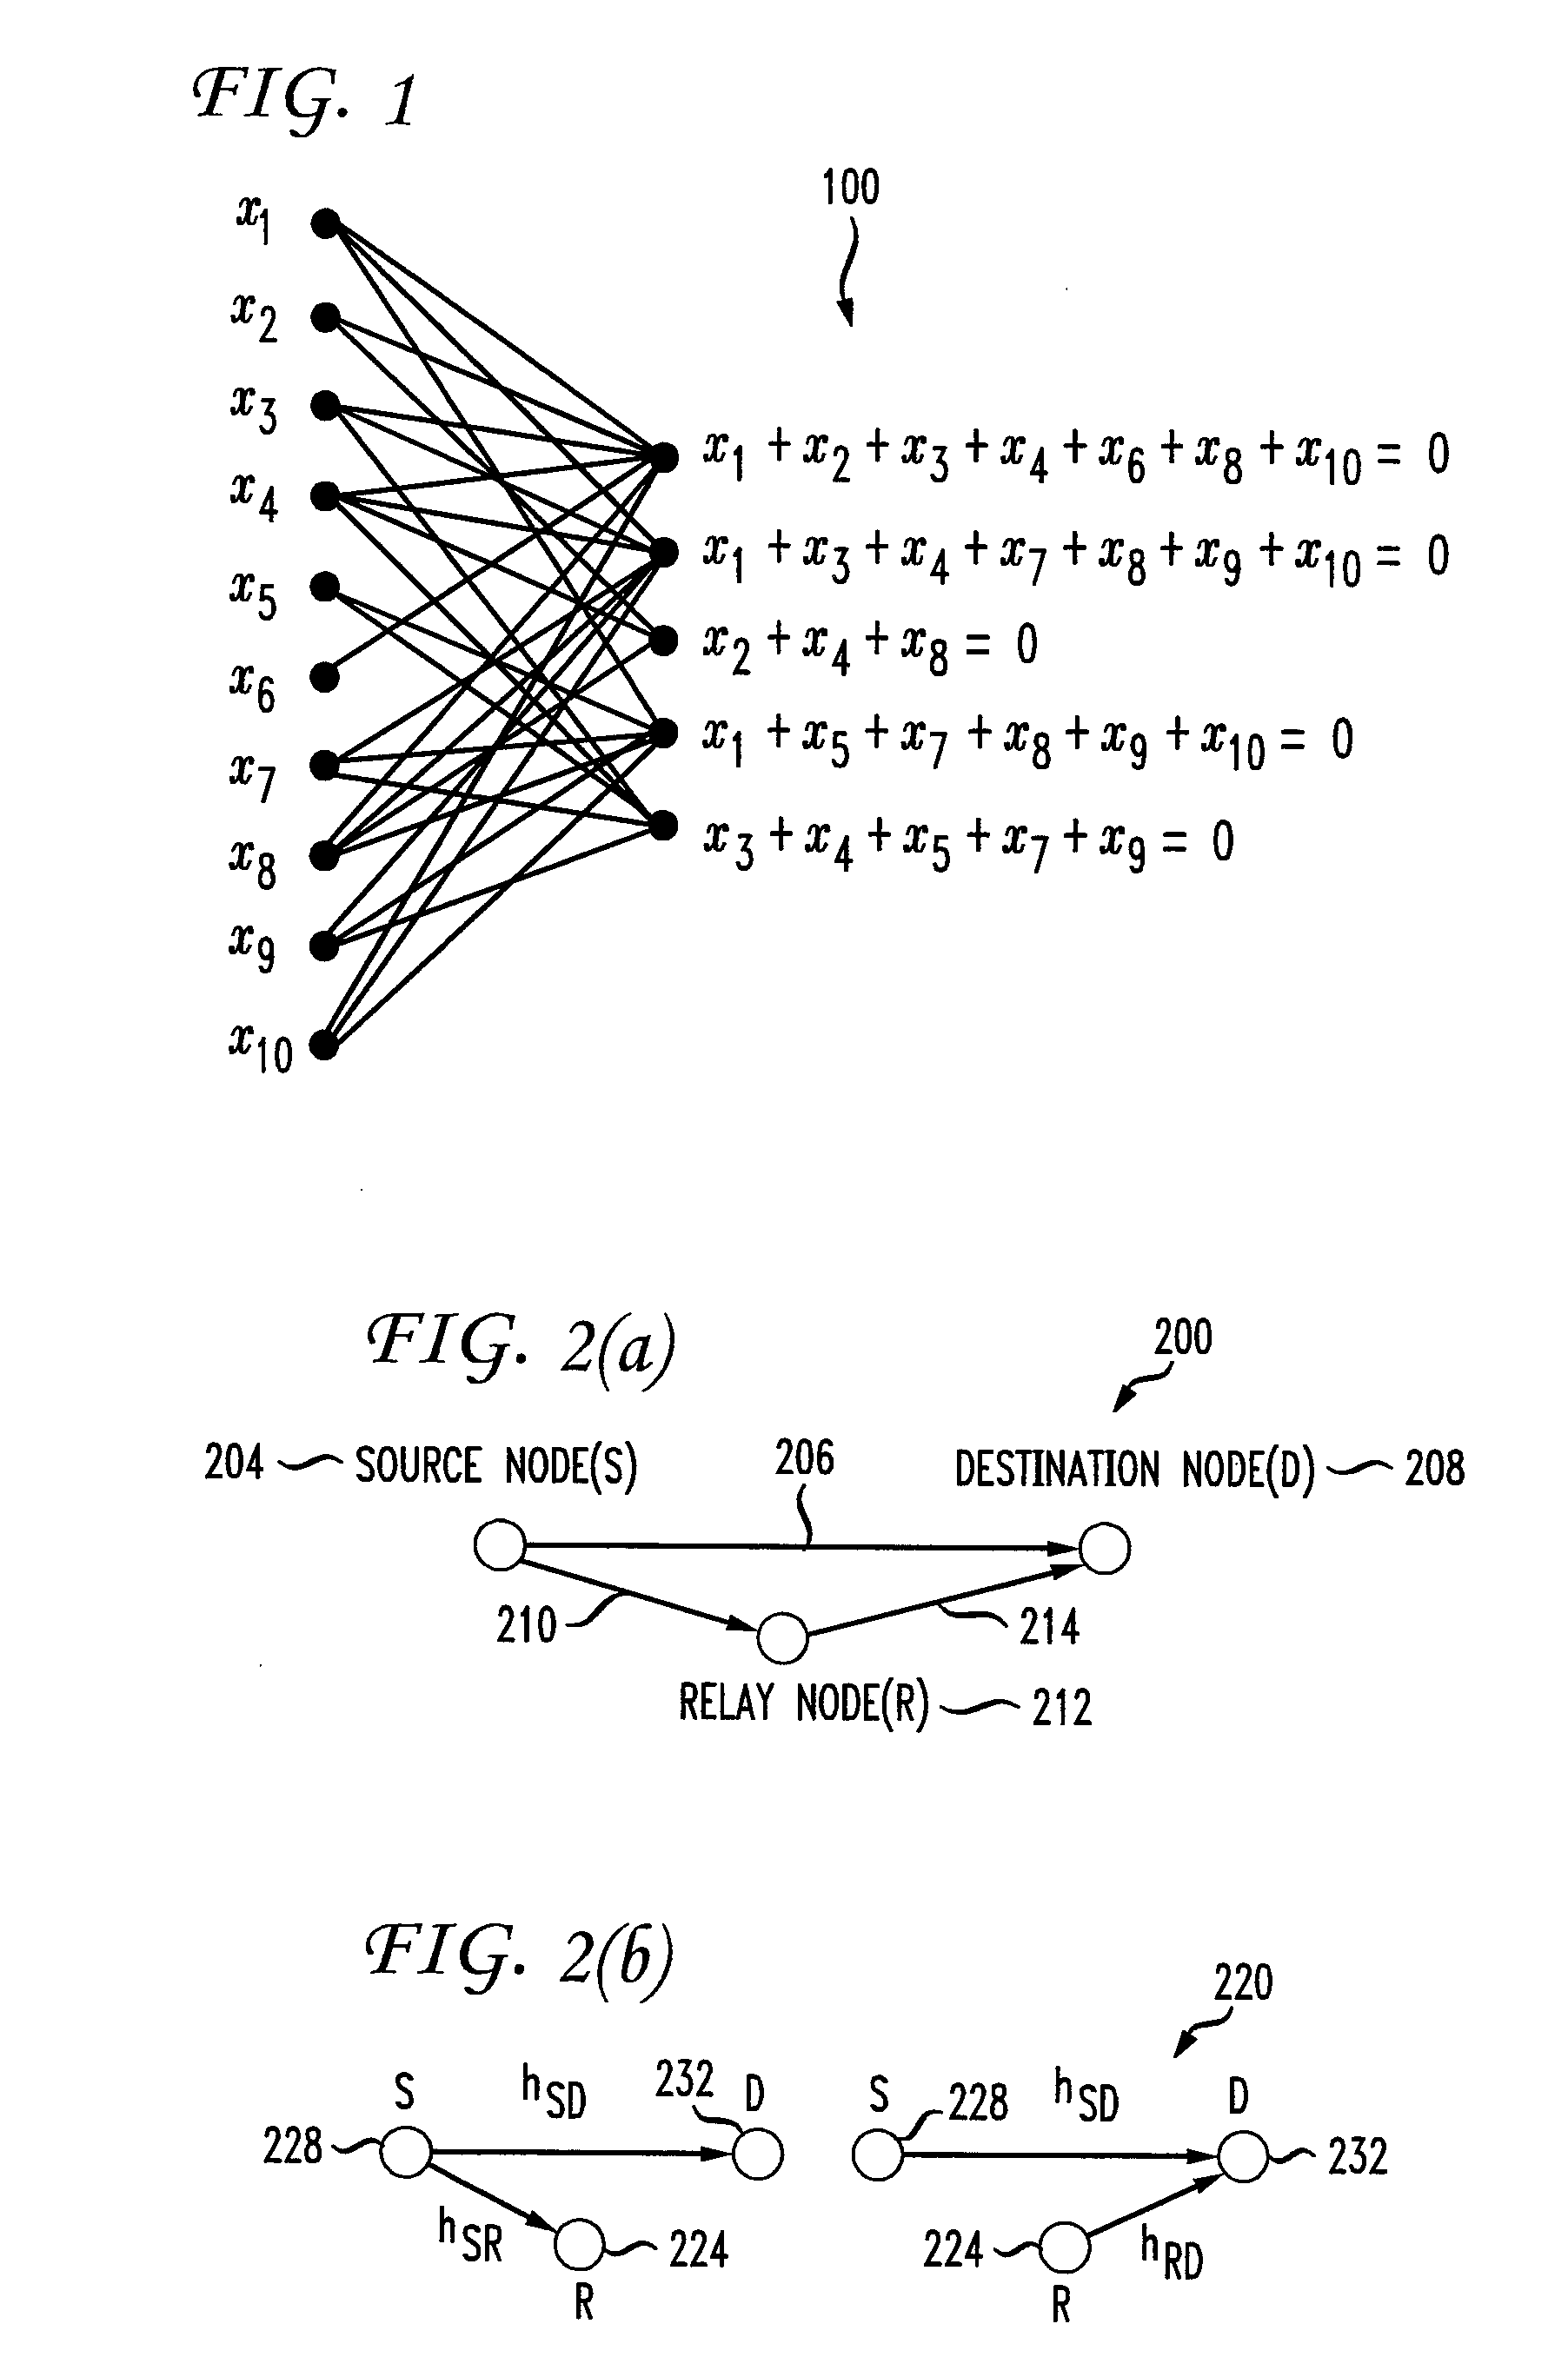 System and method for low-density parity check (LDPC) code design